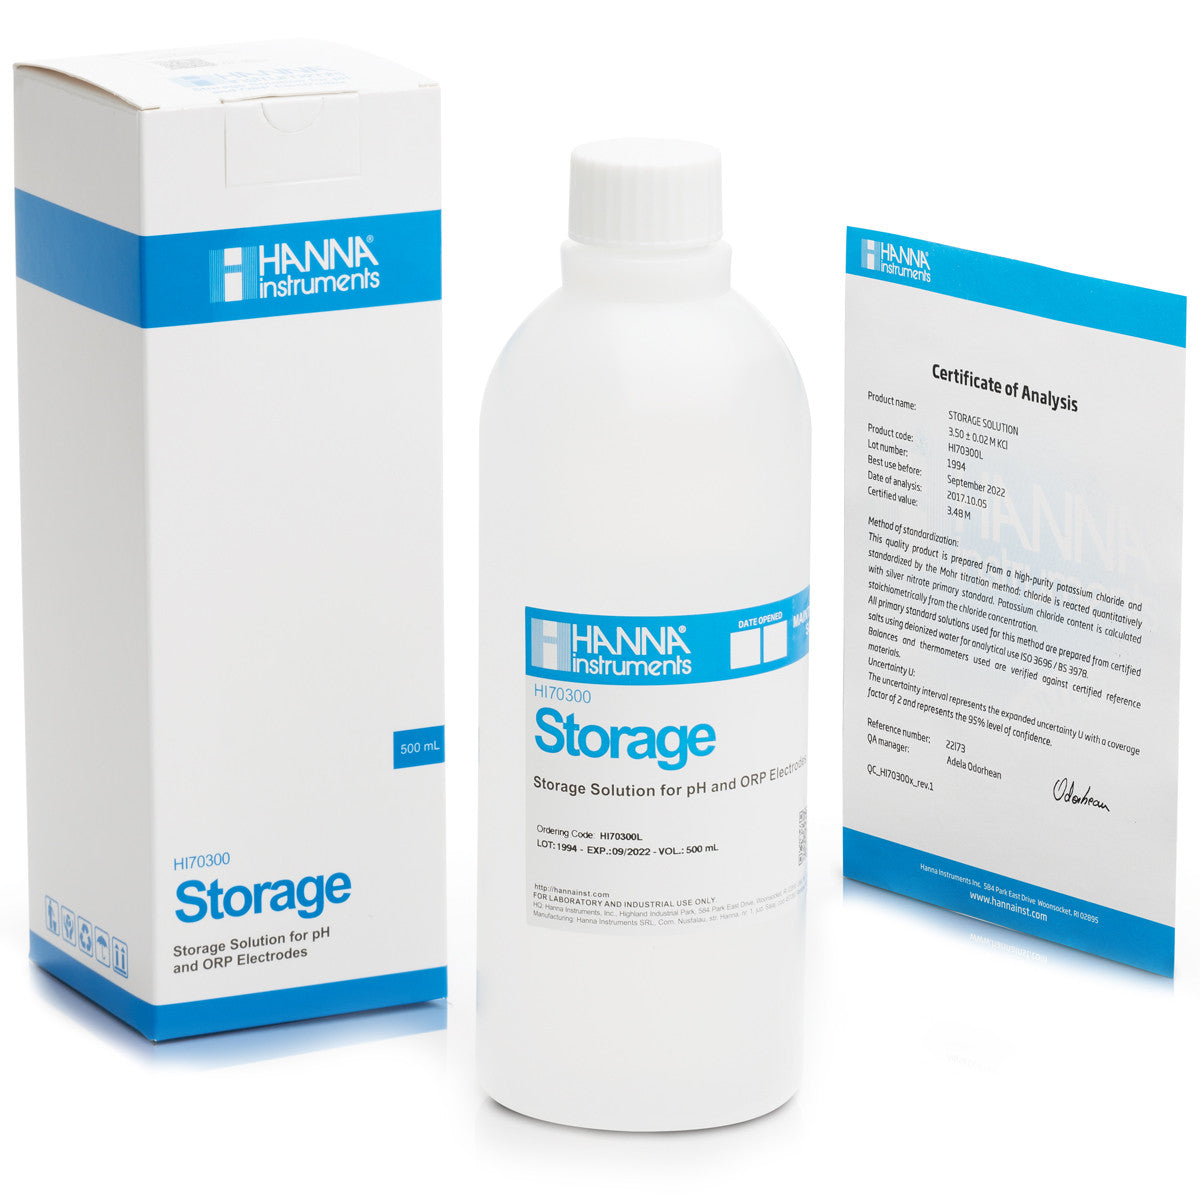 A box next to a bottle of TAS Hanna pH Electrode Storage Solution (500 mL).